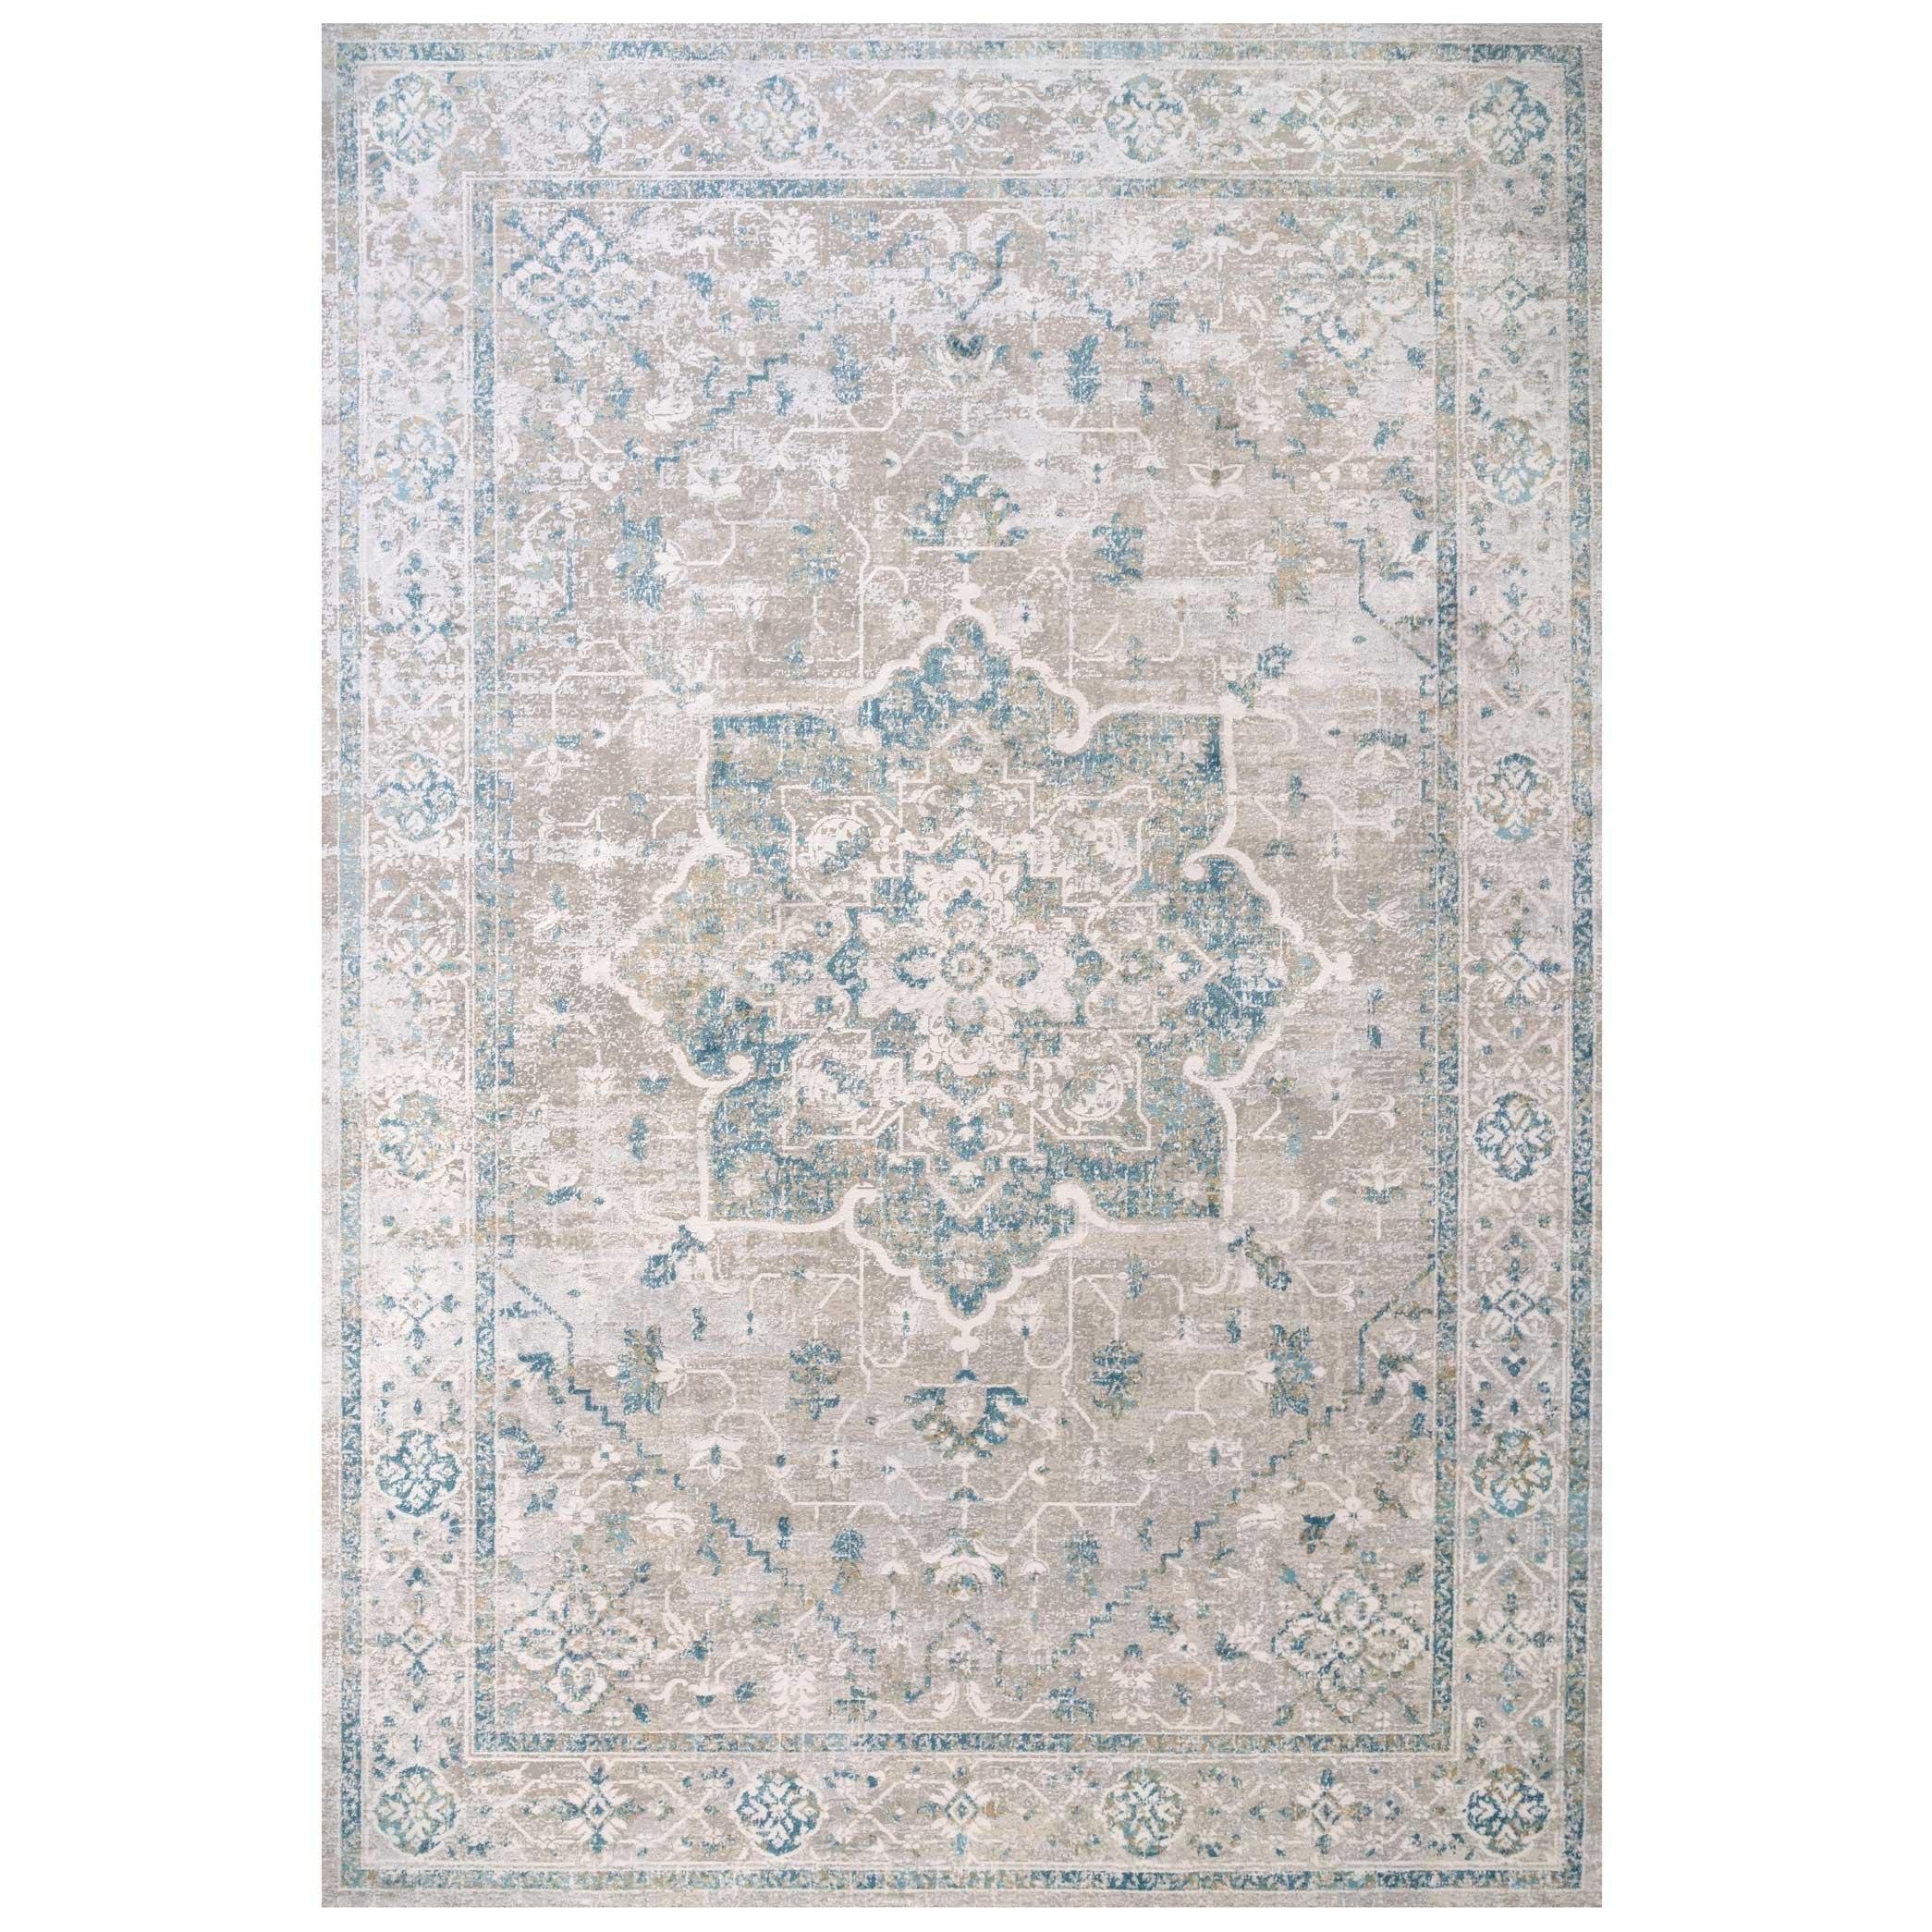 Blue Grey Floral Traditional Medallion Low Pile Area Rug - image 1